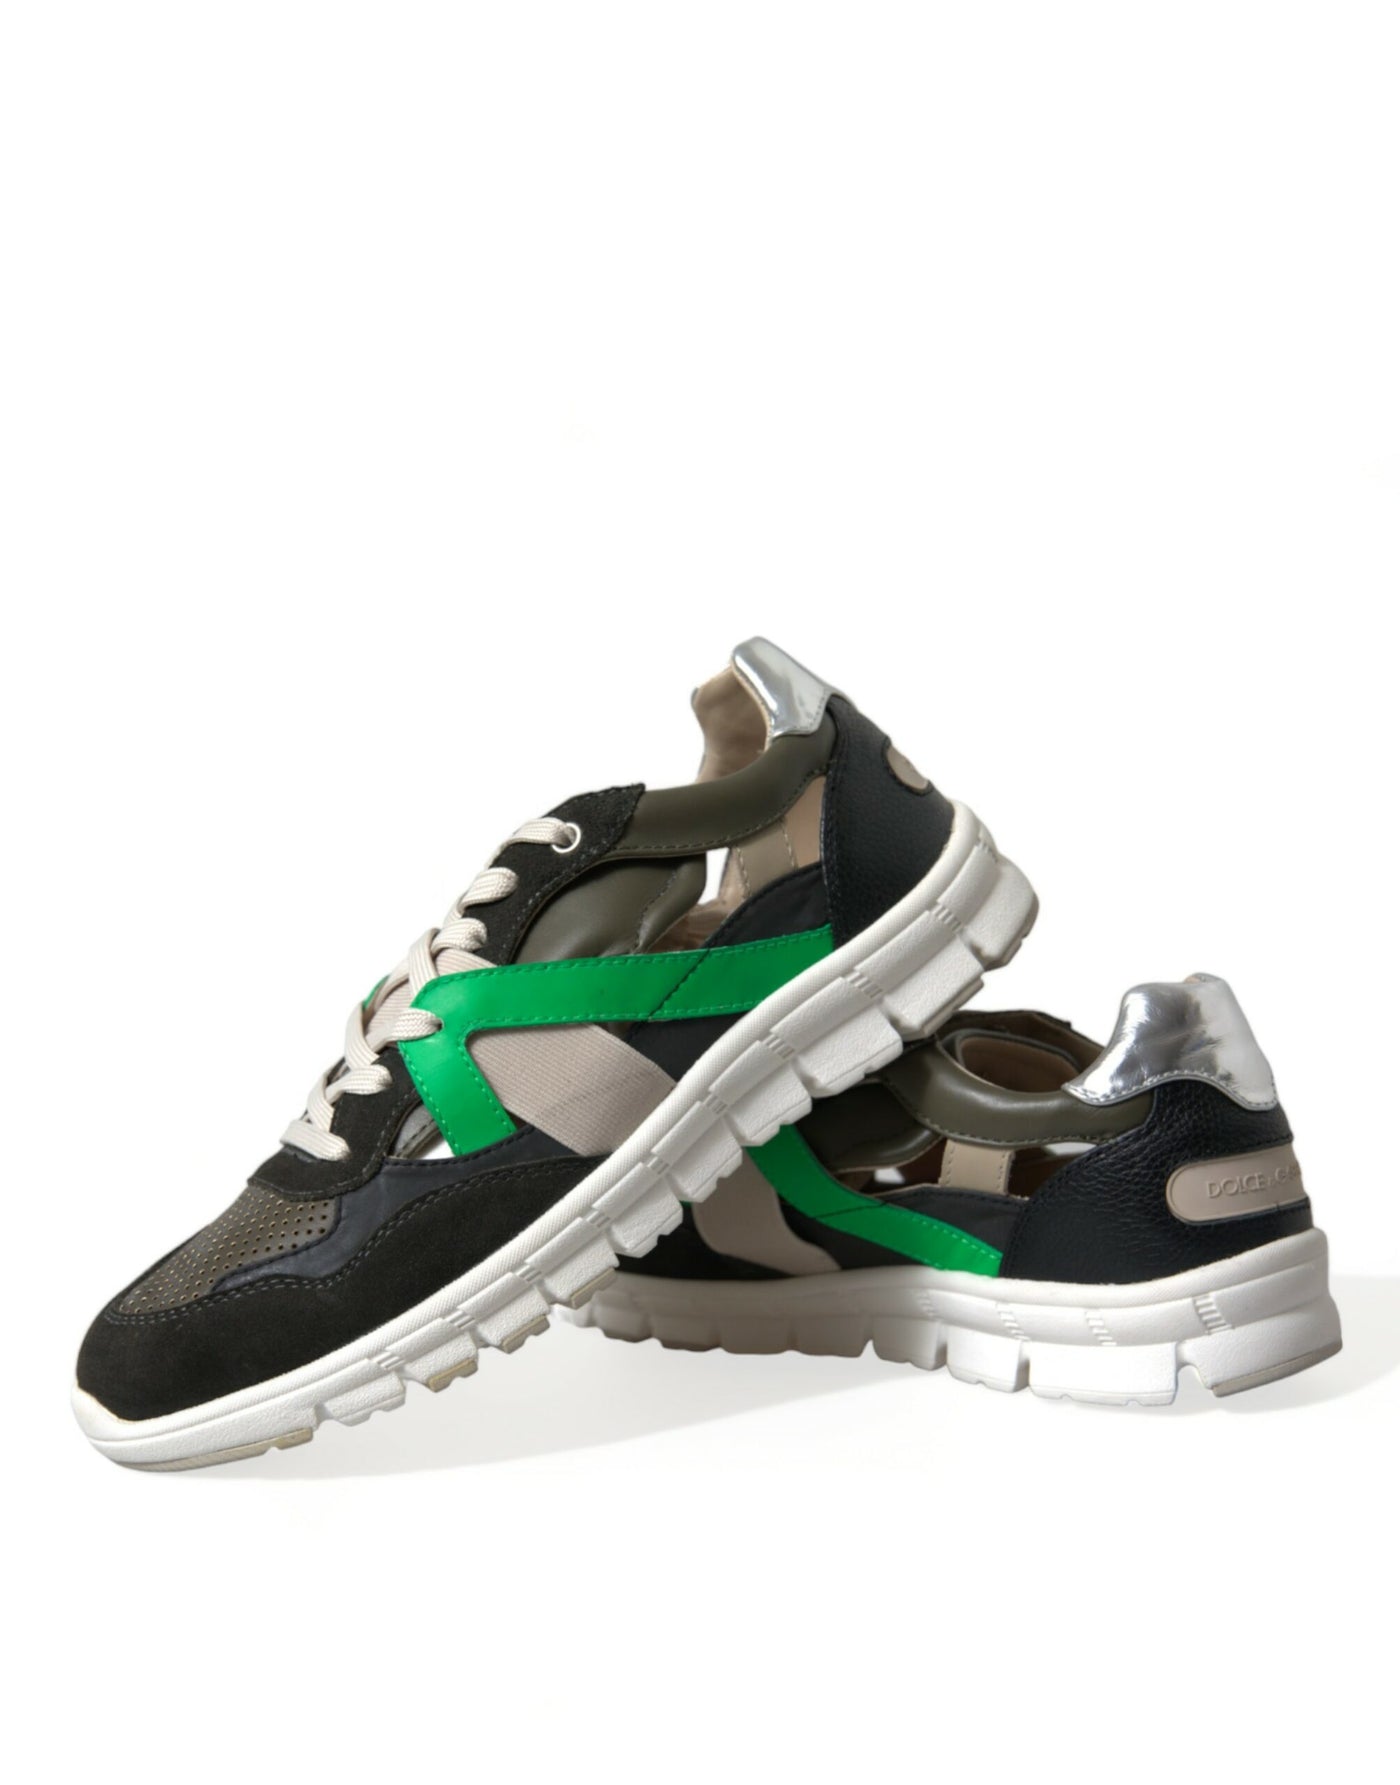 Dolce & Gabbana Multicolor Leather Suede Low Top Sneakers Shoes